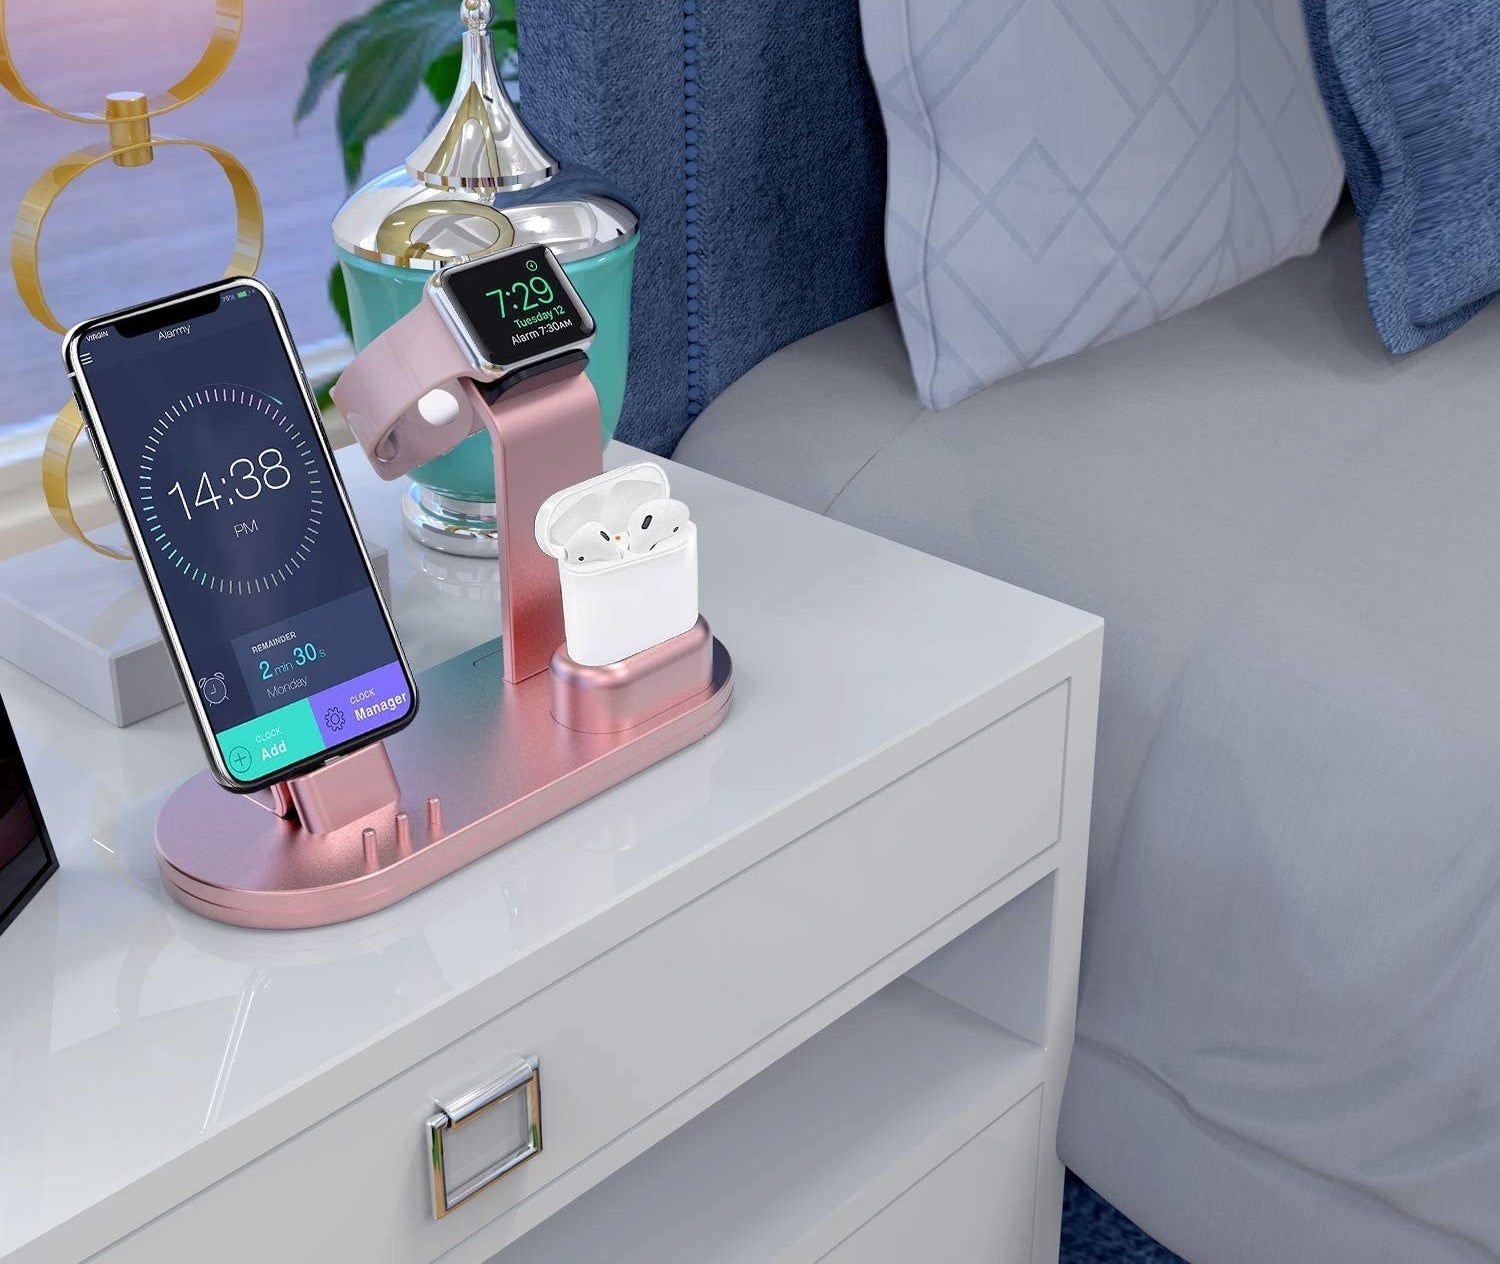 the charging stand holding two devices